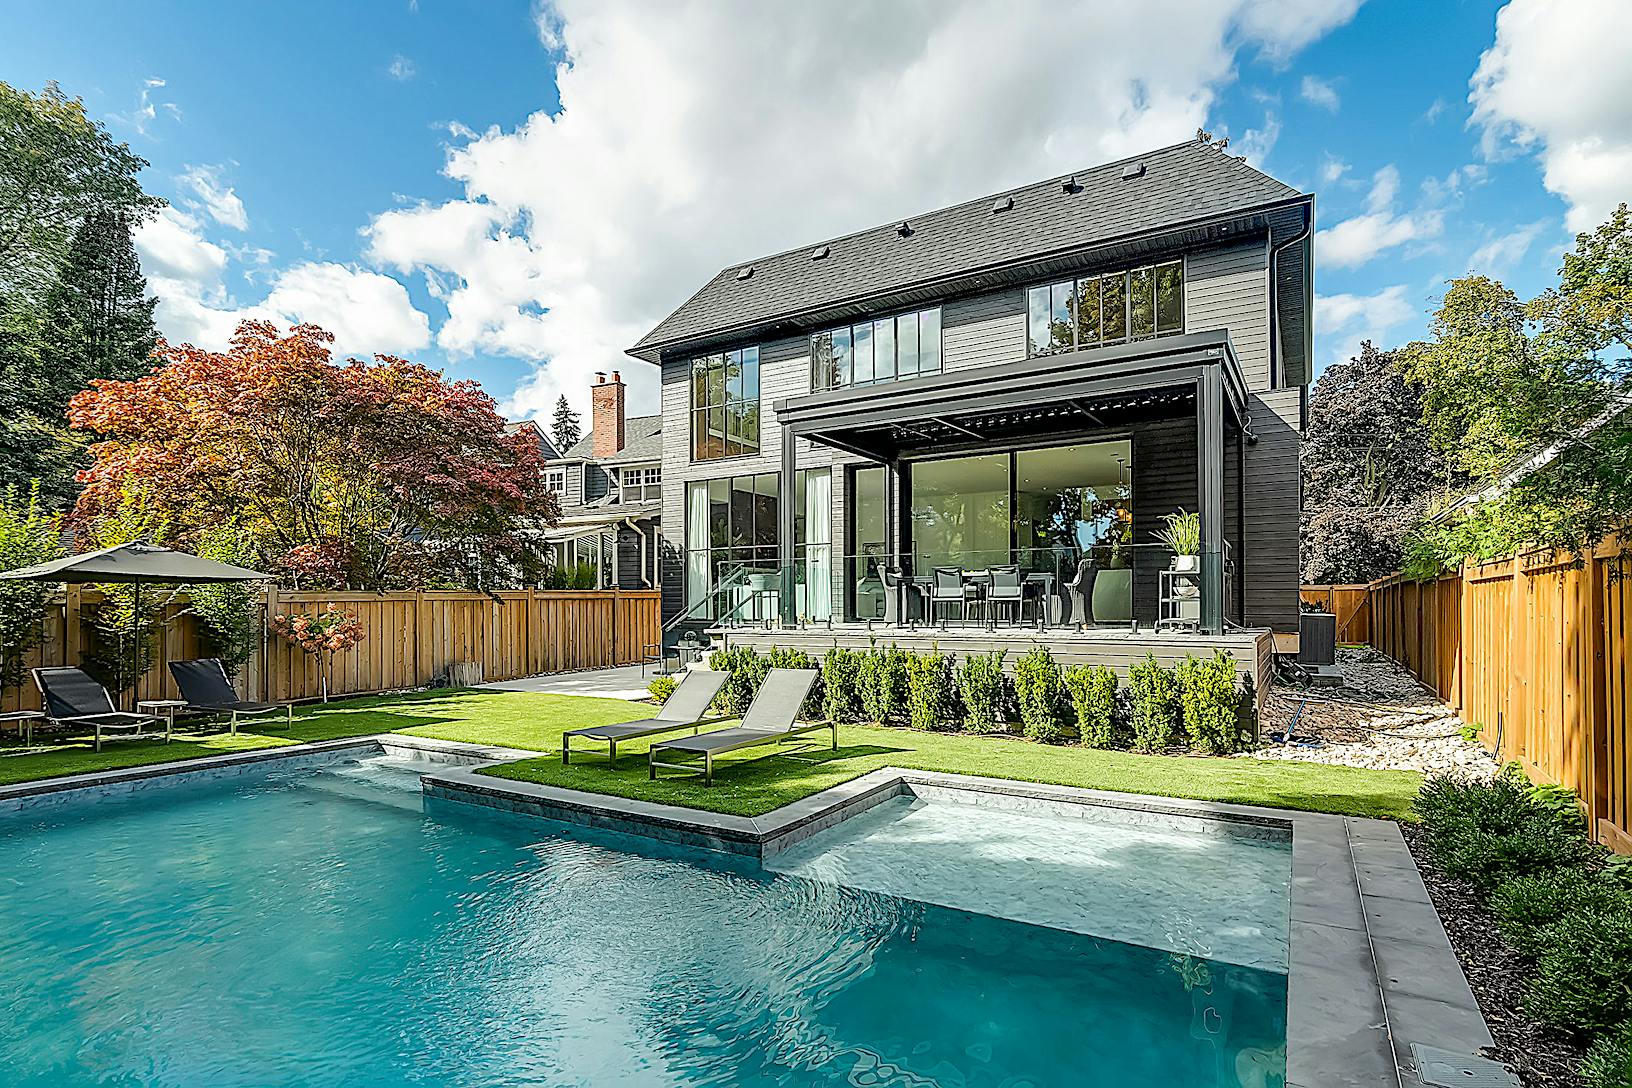 A modern home with sliding glass walls and a swimming pool in the backyard